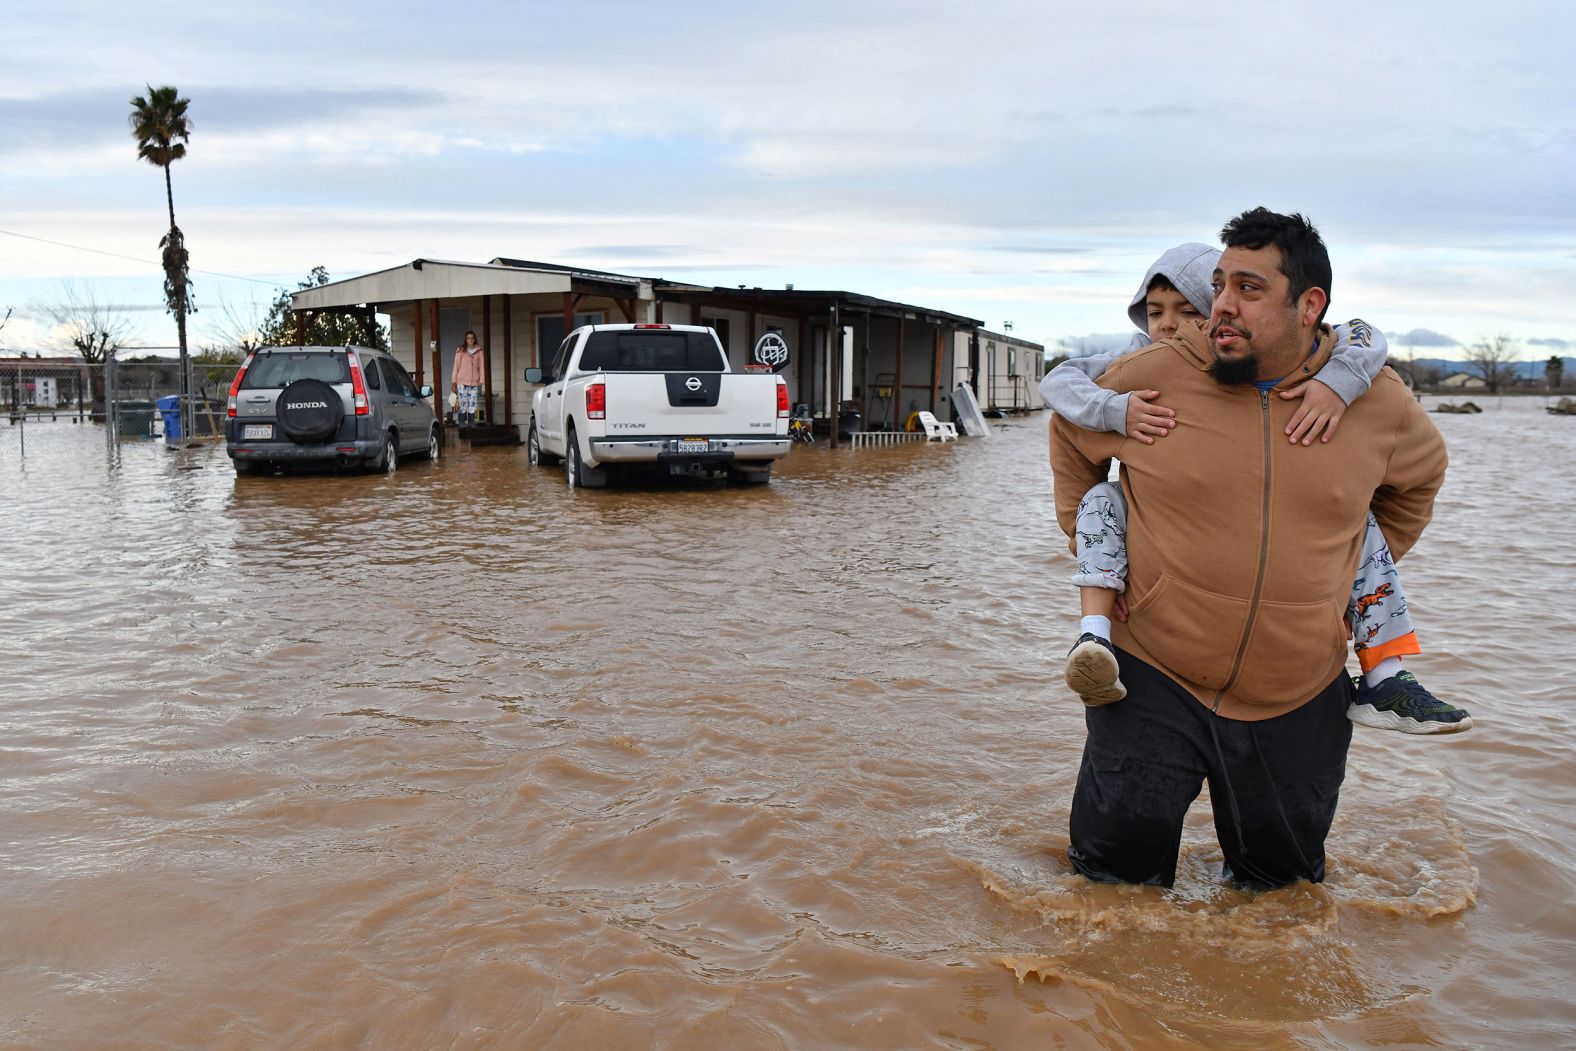 Ryan Orosco carries his 7-year-old son, Johnny, on his back while his wife, Amanda, waits on the front porch to be rescued from their flooded home in Brentwood, California, on Sunday, January 15. The state has recently been battered by <a href="https://www.cnn.com/2023/01/12/weather/california-flooding-atmospheric-river-thursday/index.html" target="_blank">a cascade of atmospheric rivers</a> — long, narrow regions in the atmosphere that can carry moisture thousands of miles. Streets have turned into rivers while trees have been toppled, homes lost power, rivers swelled and major roadways were shuttered. <a href="https://www.cnn.com/2023/01/10/weather/gallery/california-weather-flooding/index.html" target="_blank">See more photos of California flooding.</a>